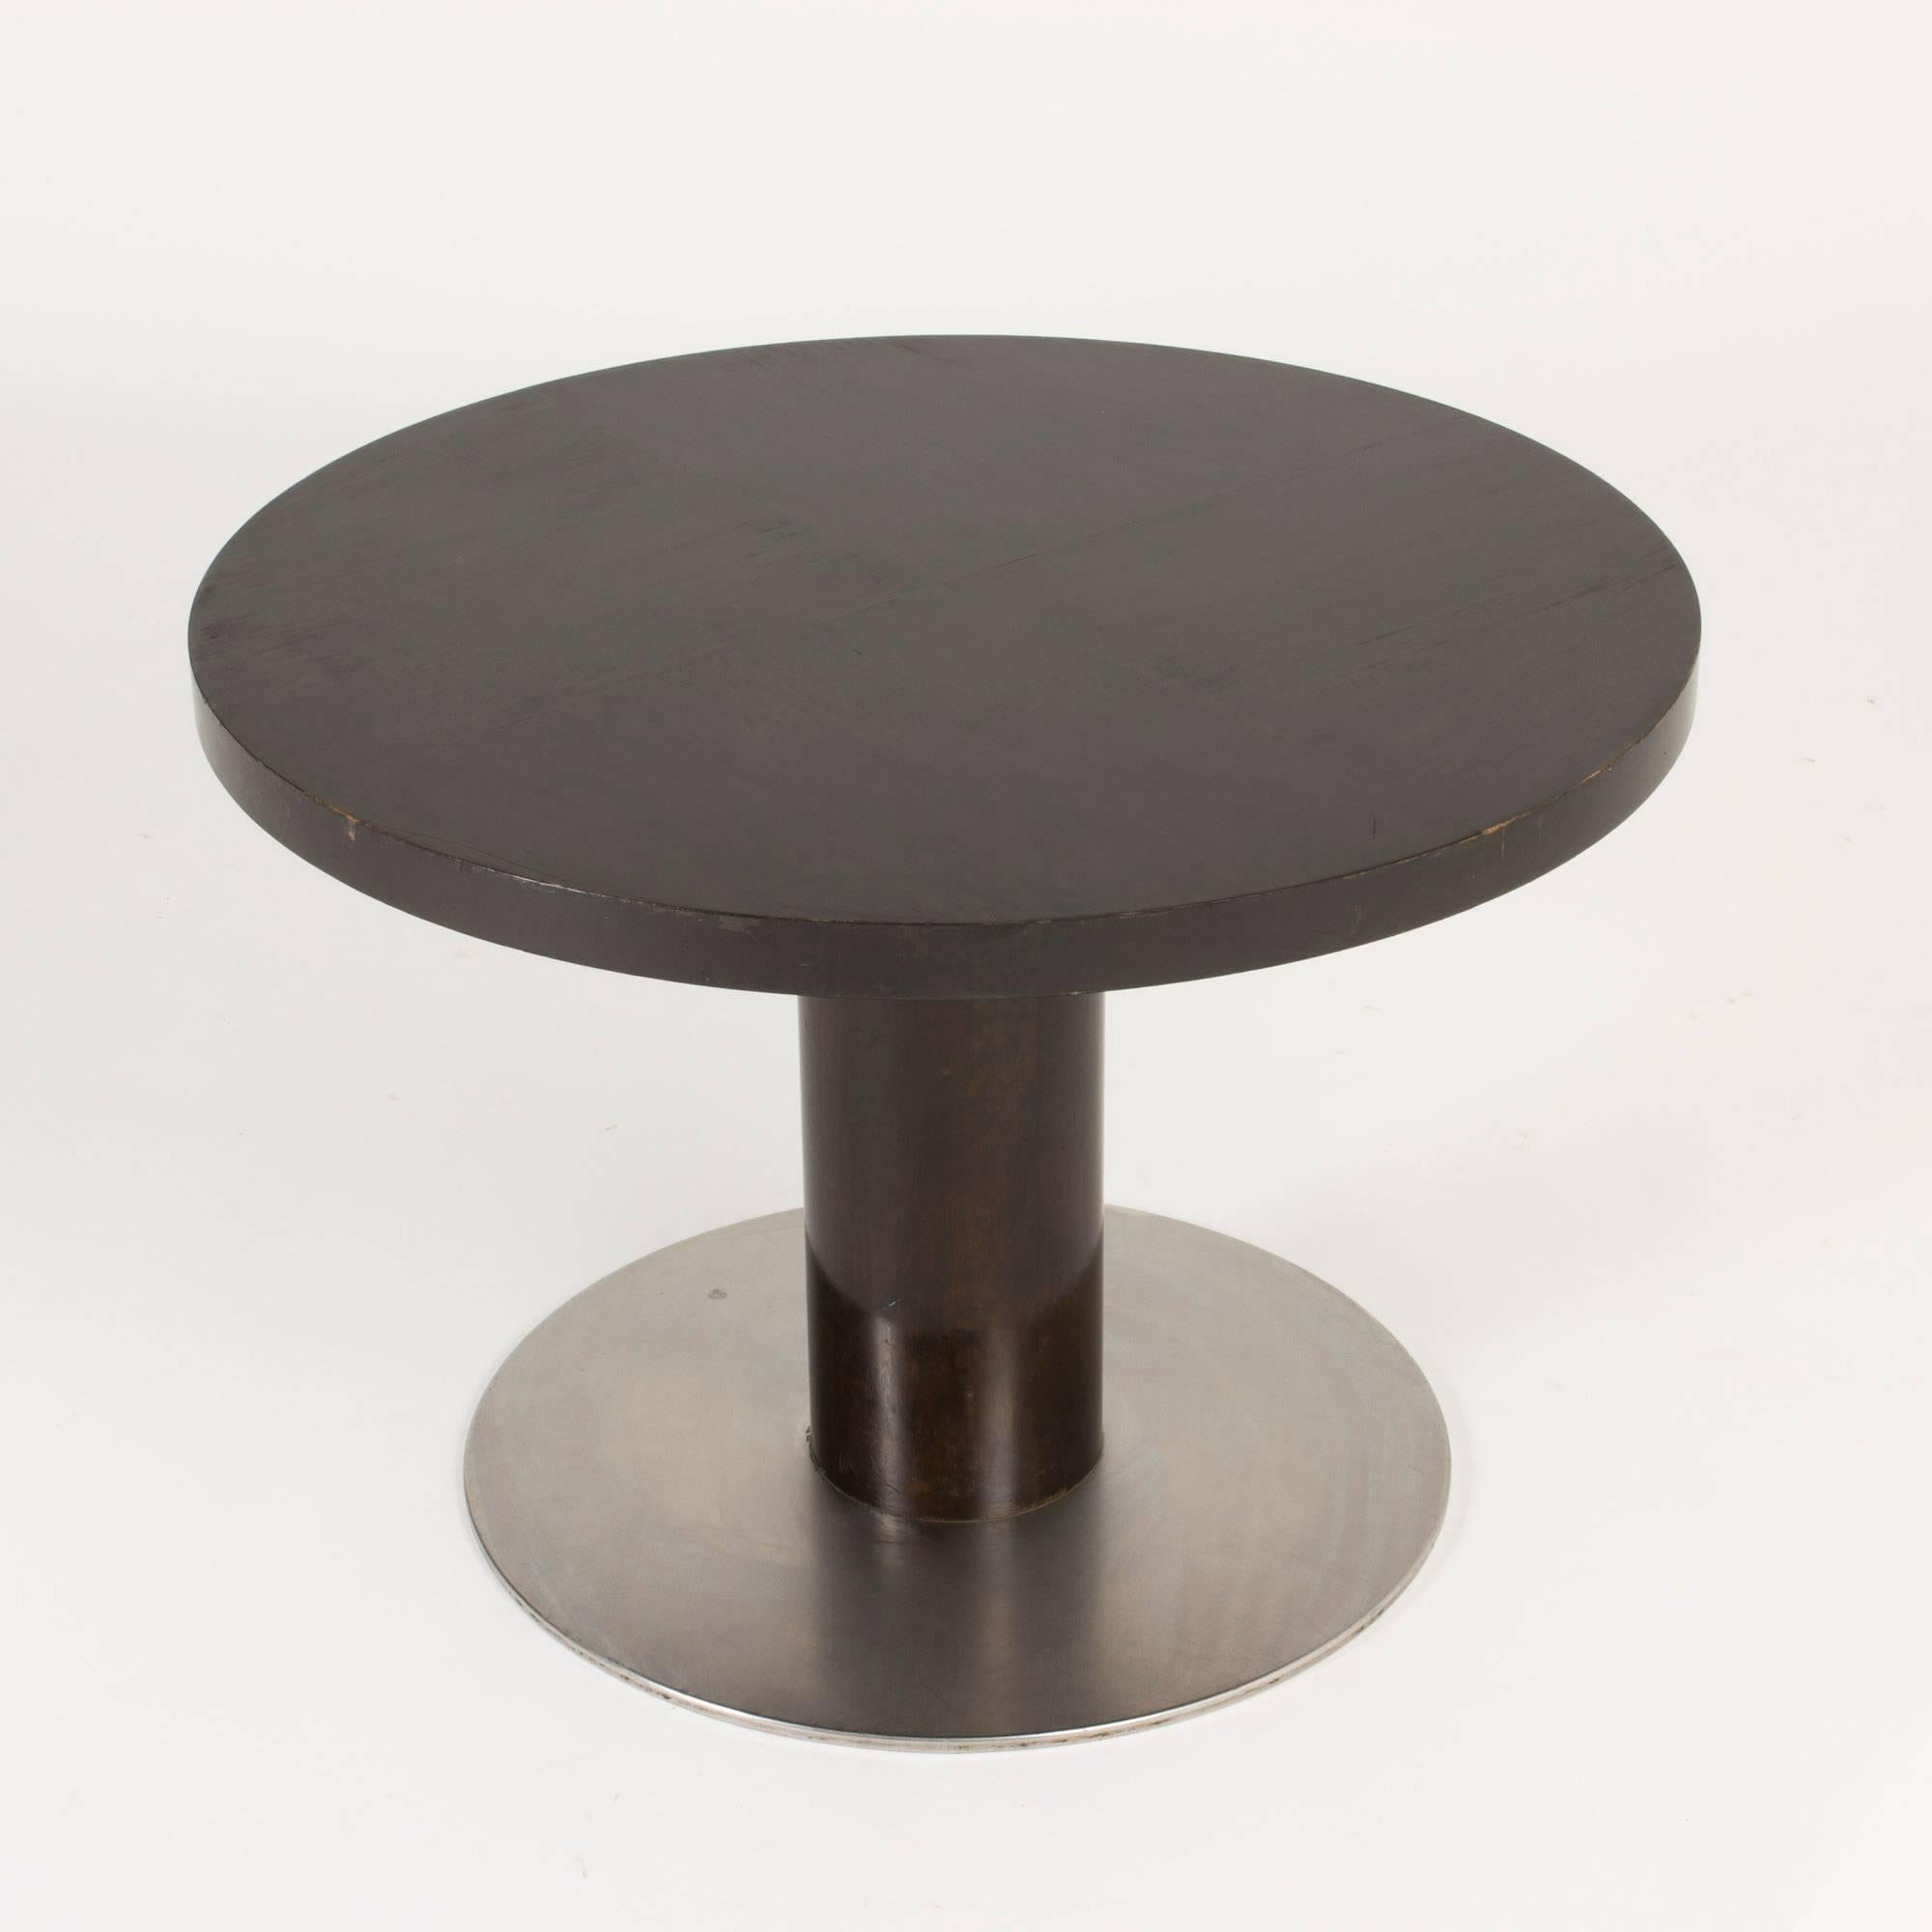 Round coffee table model “Typenko” by Axel Einar Hjorth for NK. Striking in its simplicity, made from black lacquered birch with a stainless steel base.